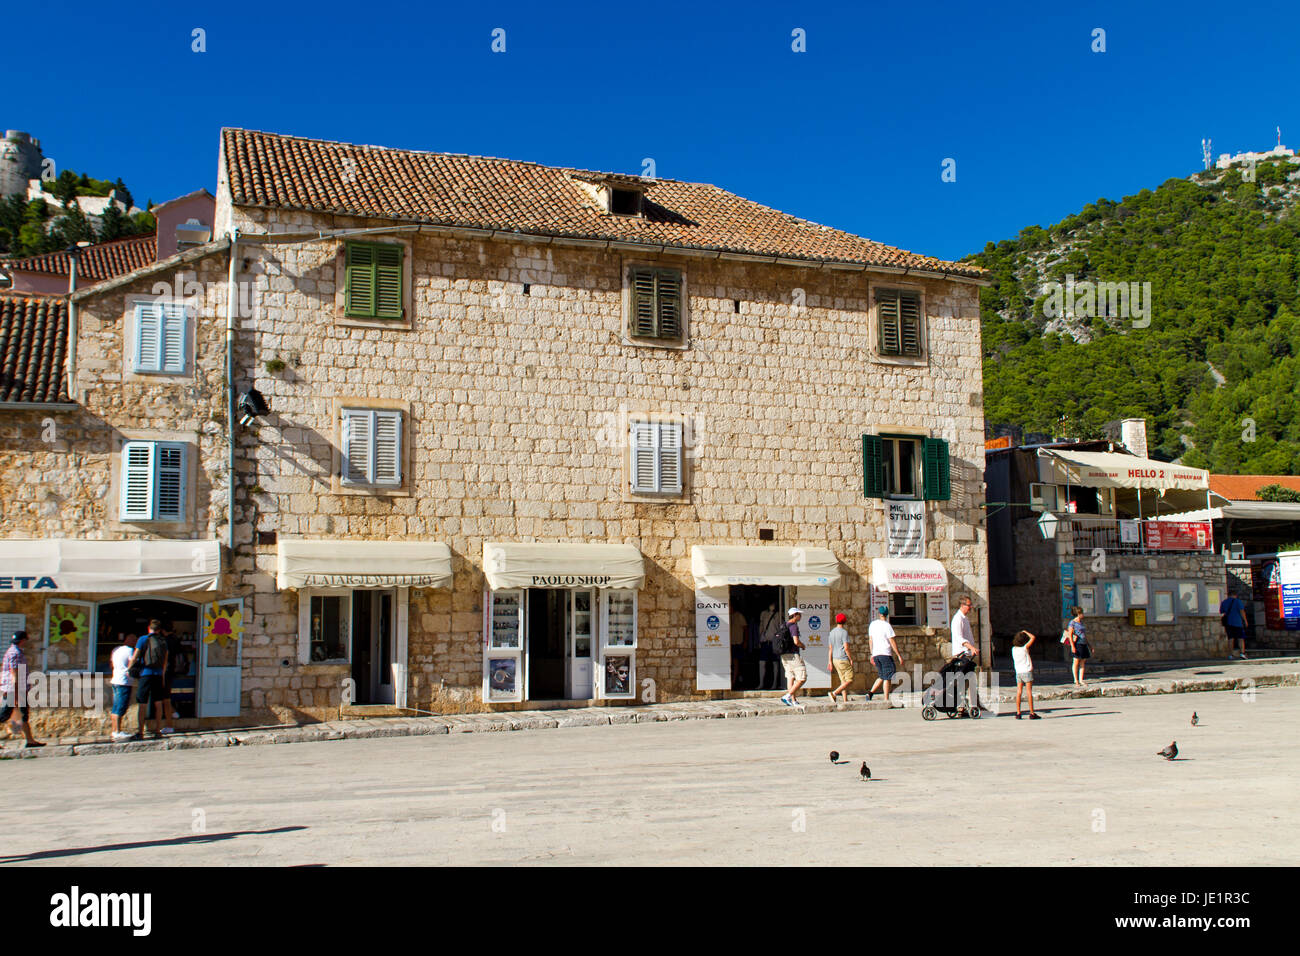 STARI GRAD, CROATIA - JULY 7, 2009: Unidentified people at Stari Grad on Hvar island, Croatia. Hvar is one of the most popular and most visited destin Stock Photo